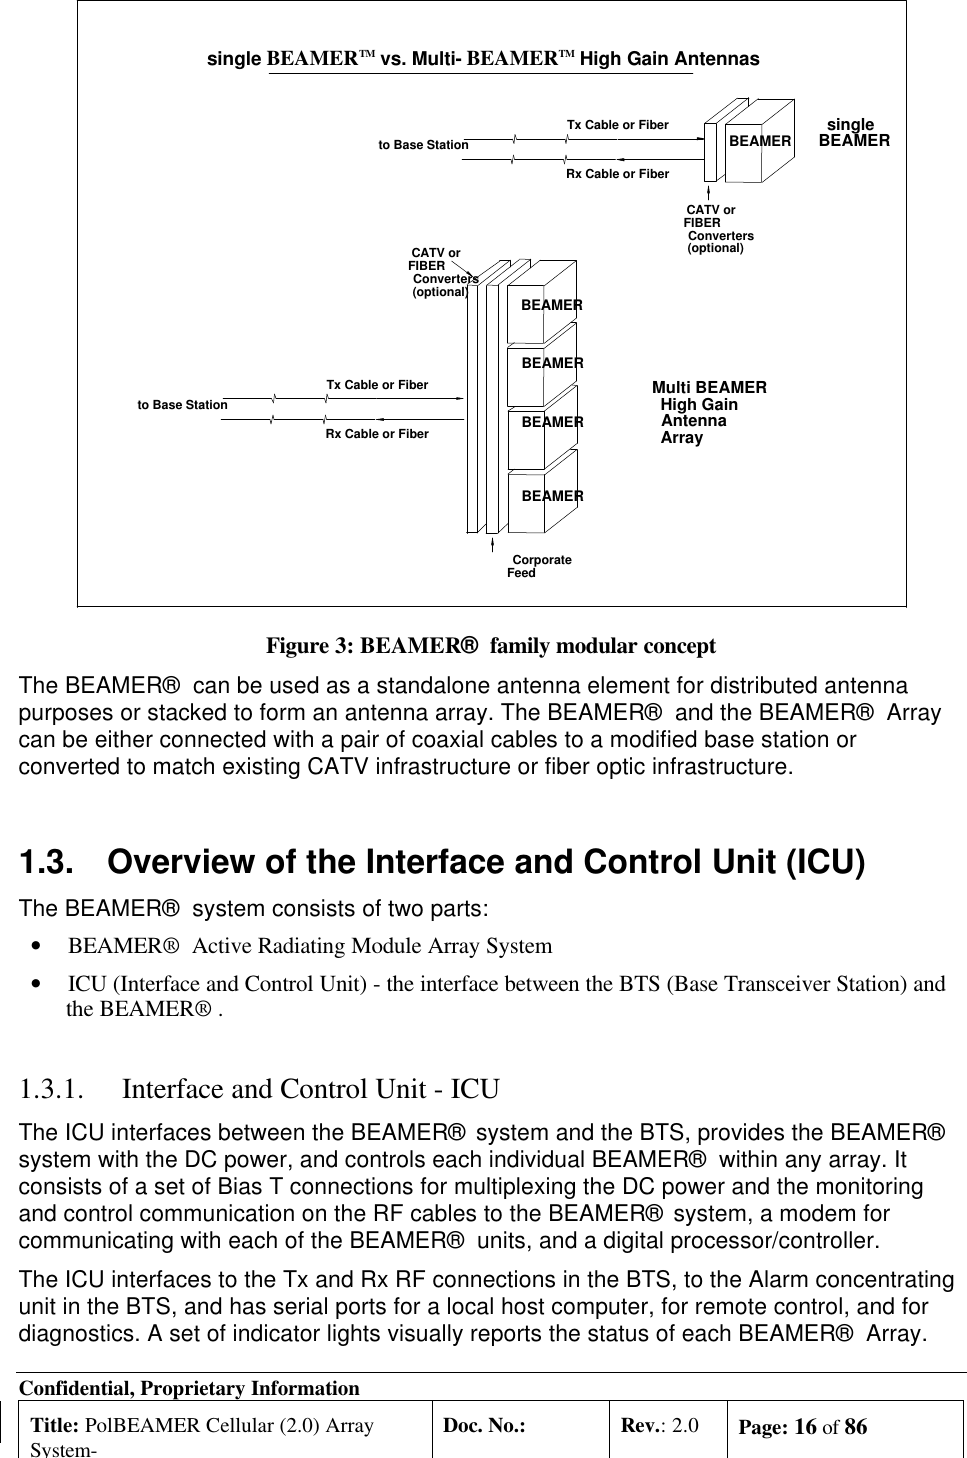 Confidential, Proprietary InformationTitle: PolBEAMER Cellular (2.0) ArraySystem-Doc. No.: Rev.: 2.0 Page: 16 of 86 BEAMER CATV or FIBER Converters (optional) Tx Cable or Fiber Rx Cable or Fiber to Base Station Tx Cable or Fiber Rx Cable or Fiber to Base StationBEAMERBEAMERBEAMERBEAMER Corporate Feed CATV or FIBER Converters (optional) singleBEAMERMulti BEAMER High Gain Antenna Array single BEAMERTM vs. Multi- BEAMERTM High Gain AntennasFigure 3: BEAMER®  family modular conceptThe BEAMER®  can be used as a standalone antenna element for distributed antennapurposes or stacked to form an antenna array. The BEAMER®  and the BEAMER®  Arraycan be either connected with a pair of coaxial cables to a modified base station orconverted to match existing CATV infrastructure or fiber optic infrastructure.1.3. Overview of the Interface and Control Unit (ICU)The BEAMER®  system consists of two parts:• BEAMER®  Active Radiating Module Array System• ICU (Interface and Control Unit) - the interface between the BTS (Base Transceiver Station) andthe BEAMER® .1.3.1. Interface and Control Unit - ICUThe ICU interfaces between the BEAMER®  system and the BTS, provides the BEAMER®system with the DC power, and controls each individual BEAMER®  within any array. Itconsists of a set of Bias T connections for multiplexing the DC power and the monitoringand control communication on the RF cables to the BEAMER®  system, a modem forcommunicating with each of the BEAMER®  units, and a digital processor/controller.The ICU interfaces to the Tx and Rx RF connections in the BTS, to the Alarm concentratingunit in the BTS, and has serial ports for a local host computer, for remote control, and fordiagnostics. A set of indicator lights visually reports the status of each BEAMER®  Array.